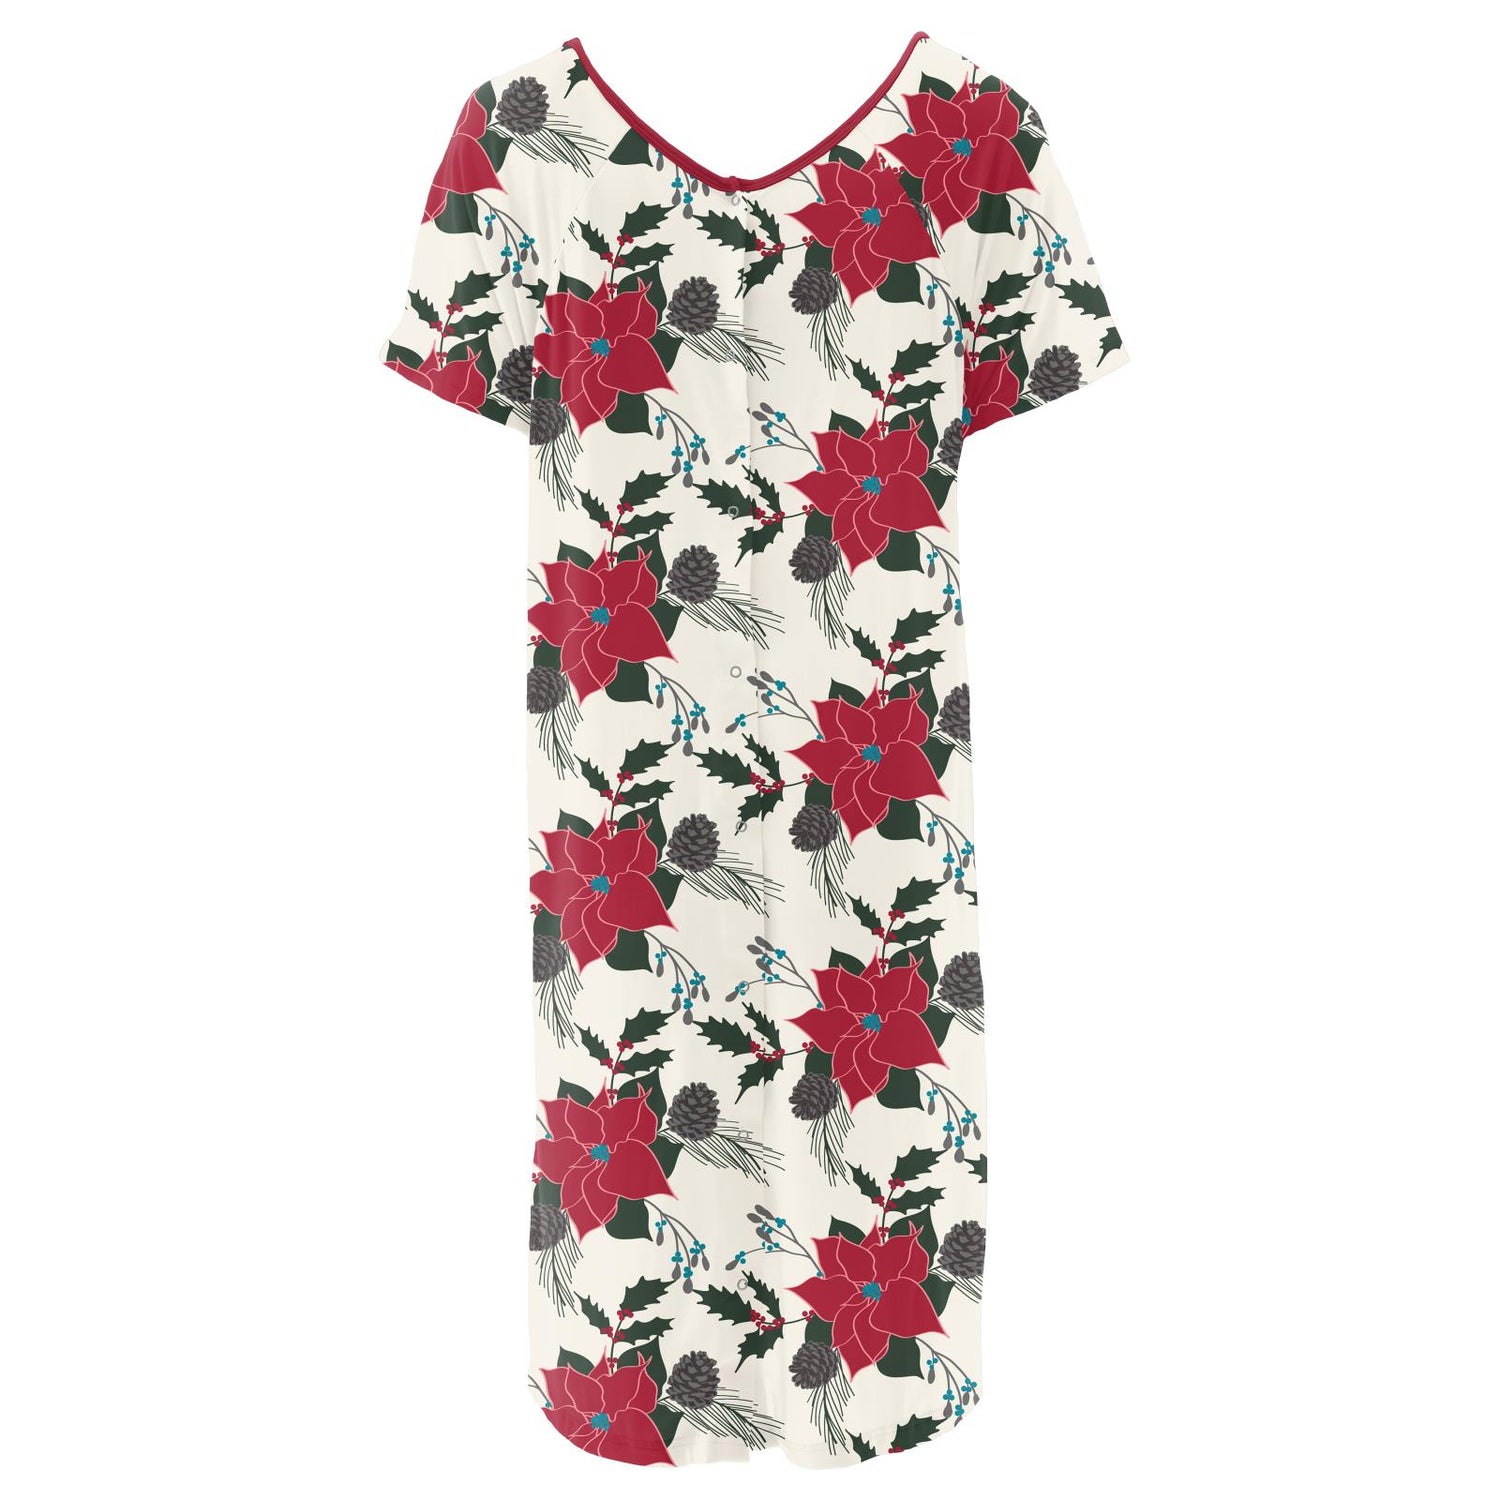 Women's Print Hospital Gown in Christmas Floral